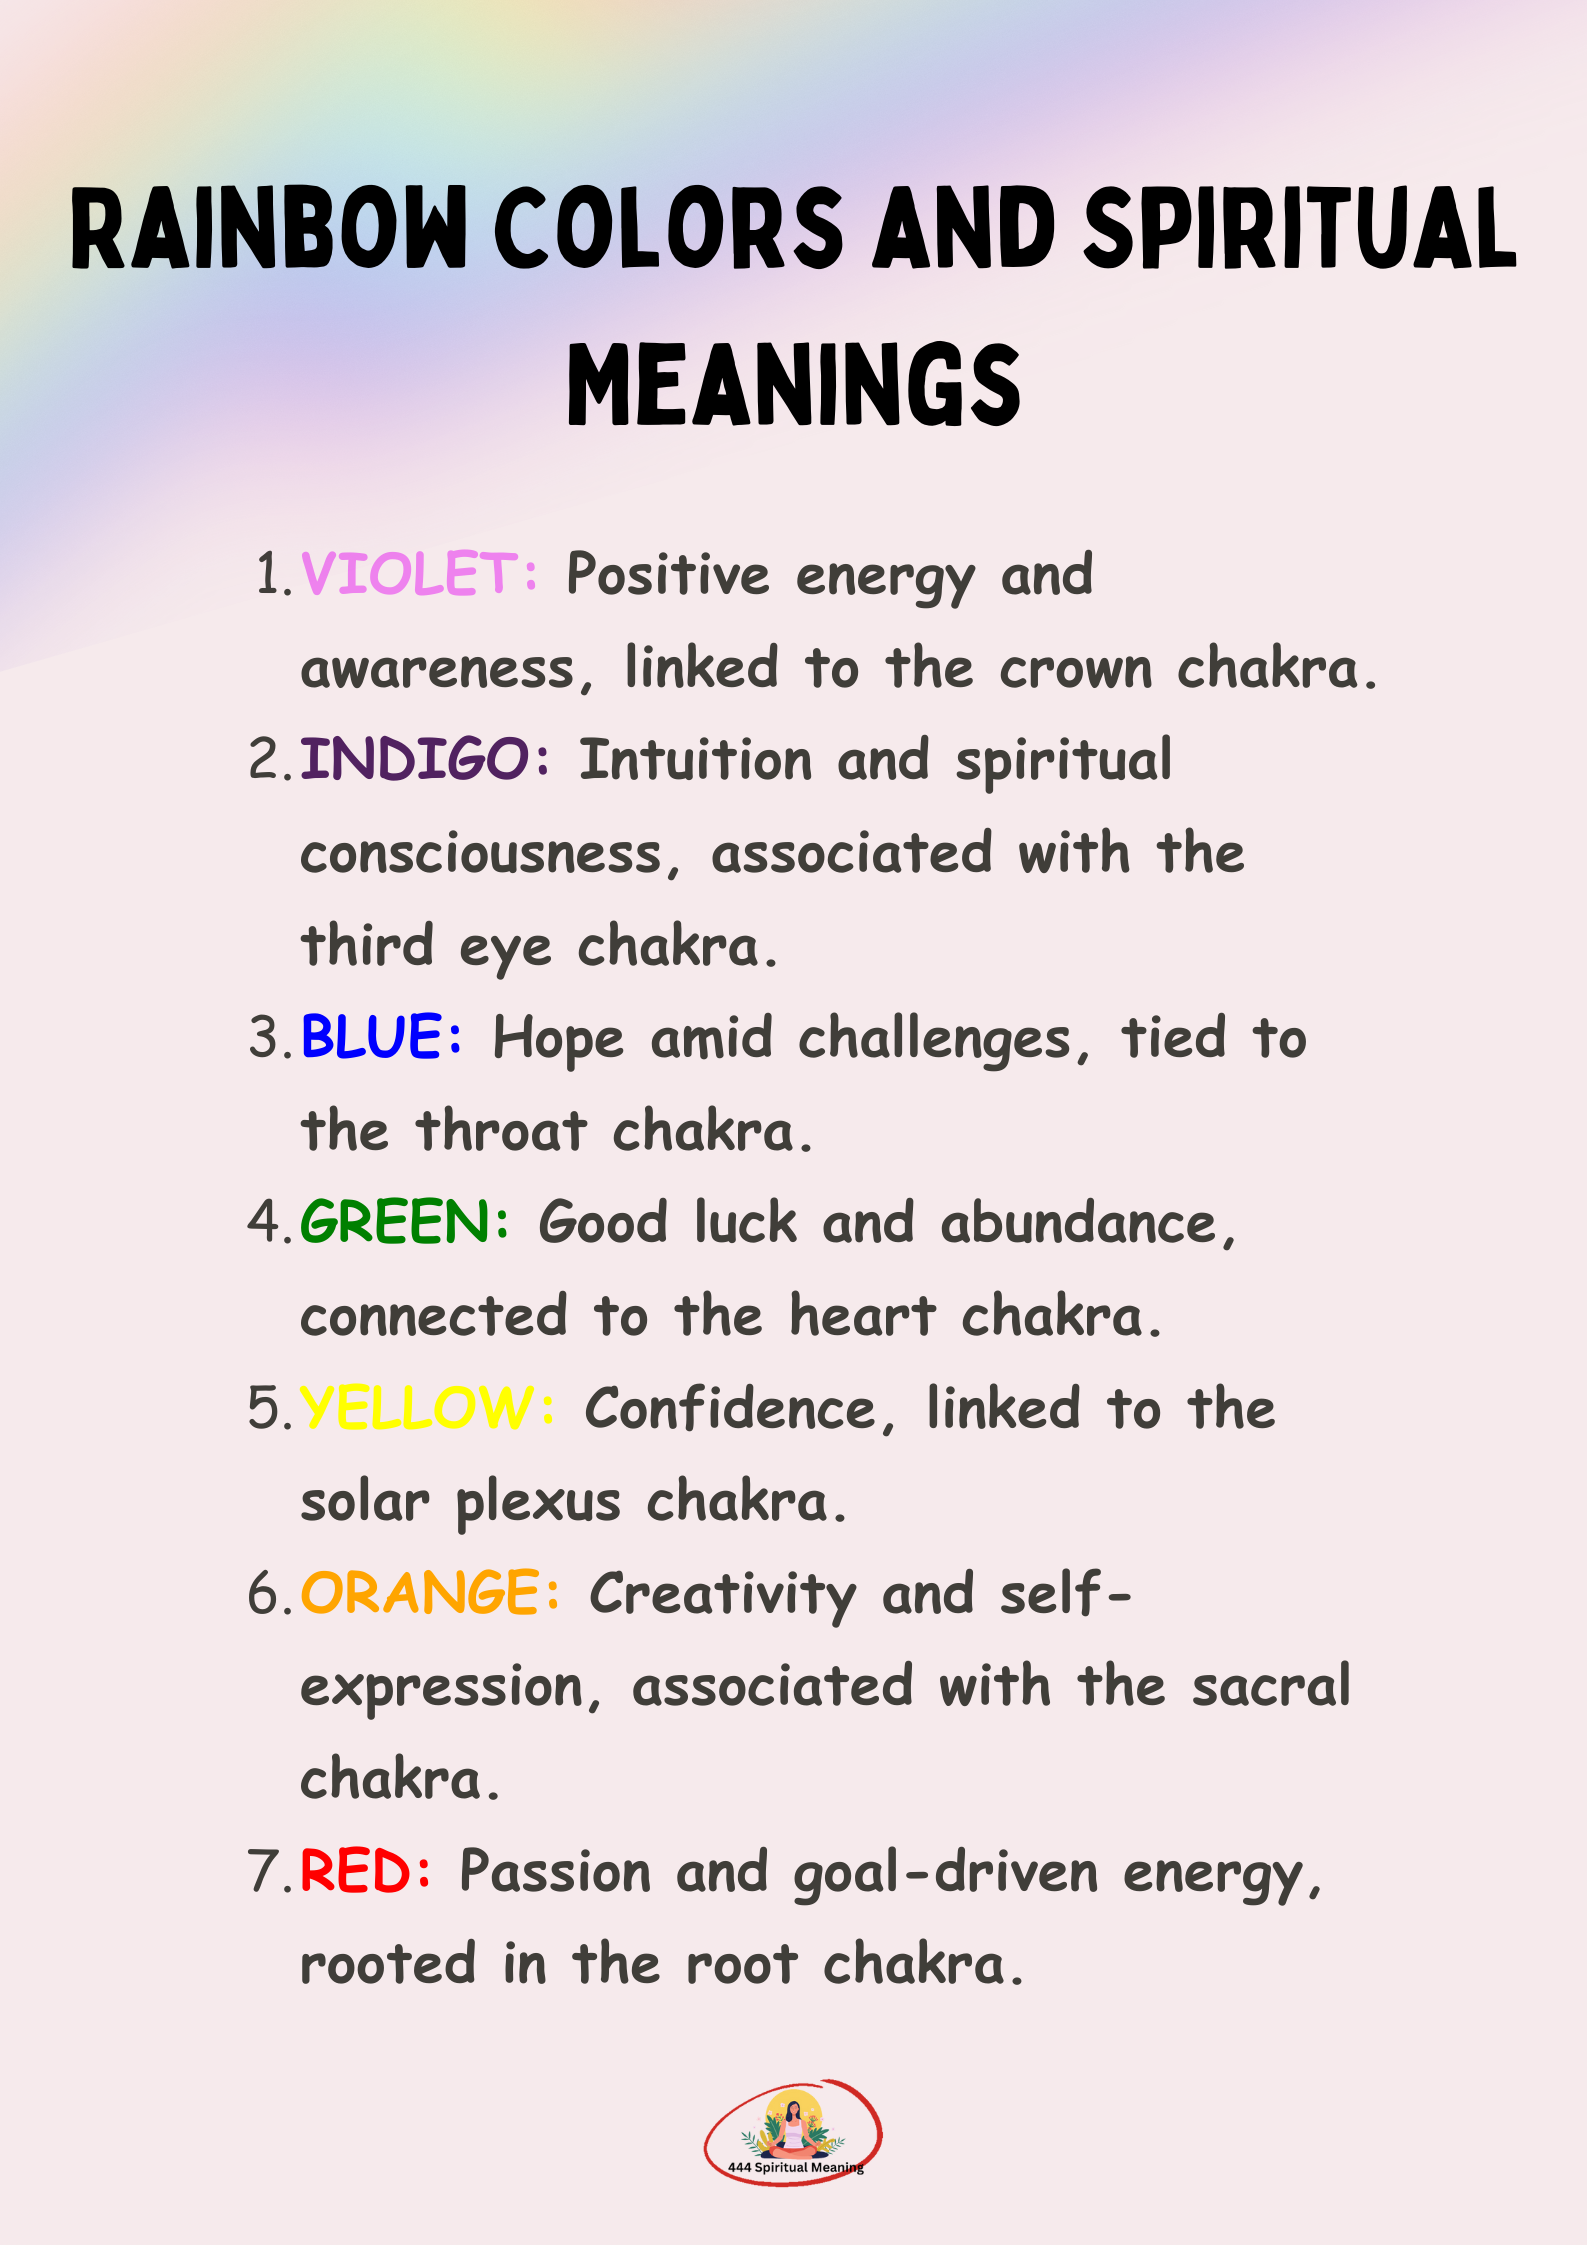 Rainbow Colors and Spiritual Meanings